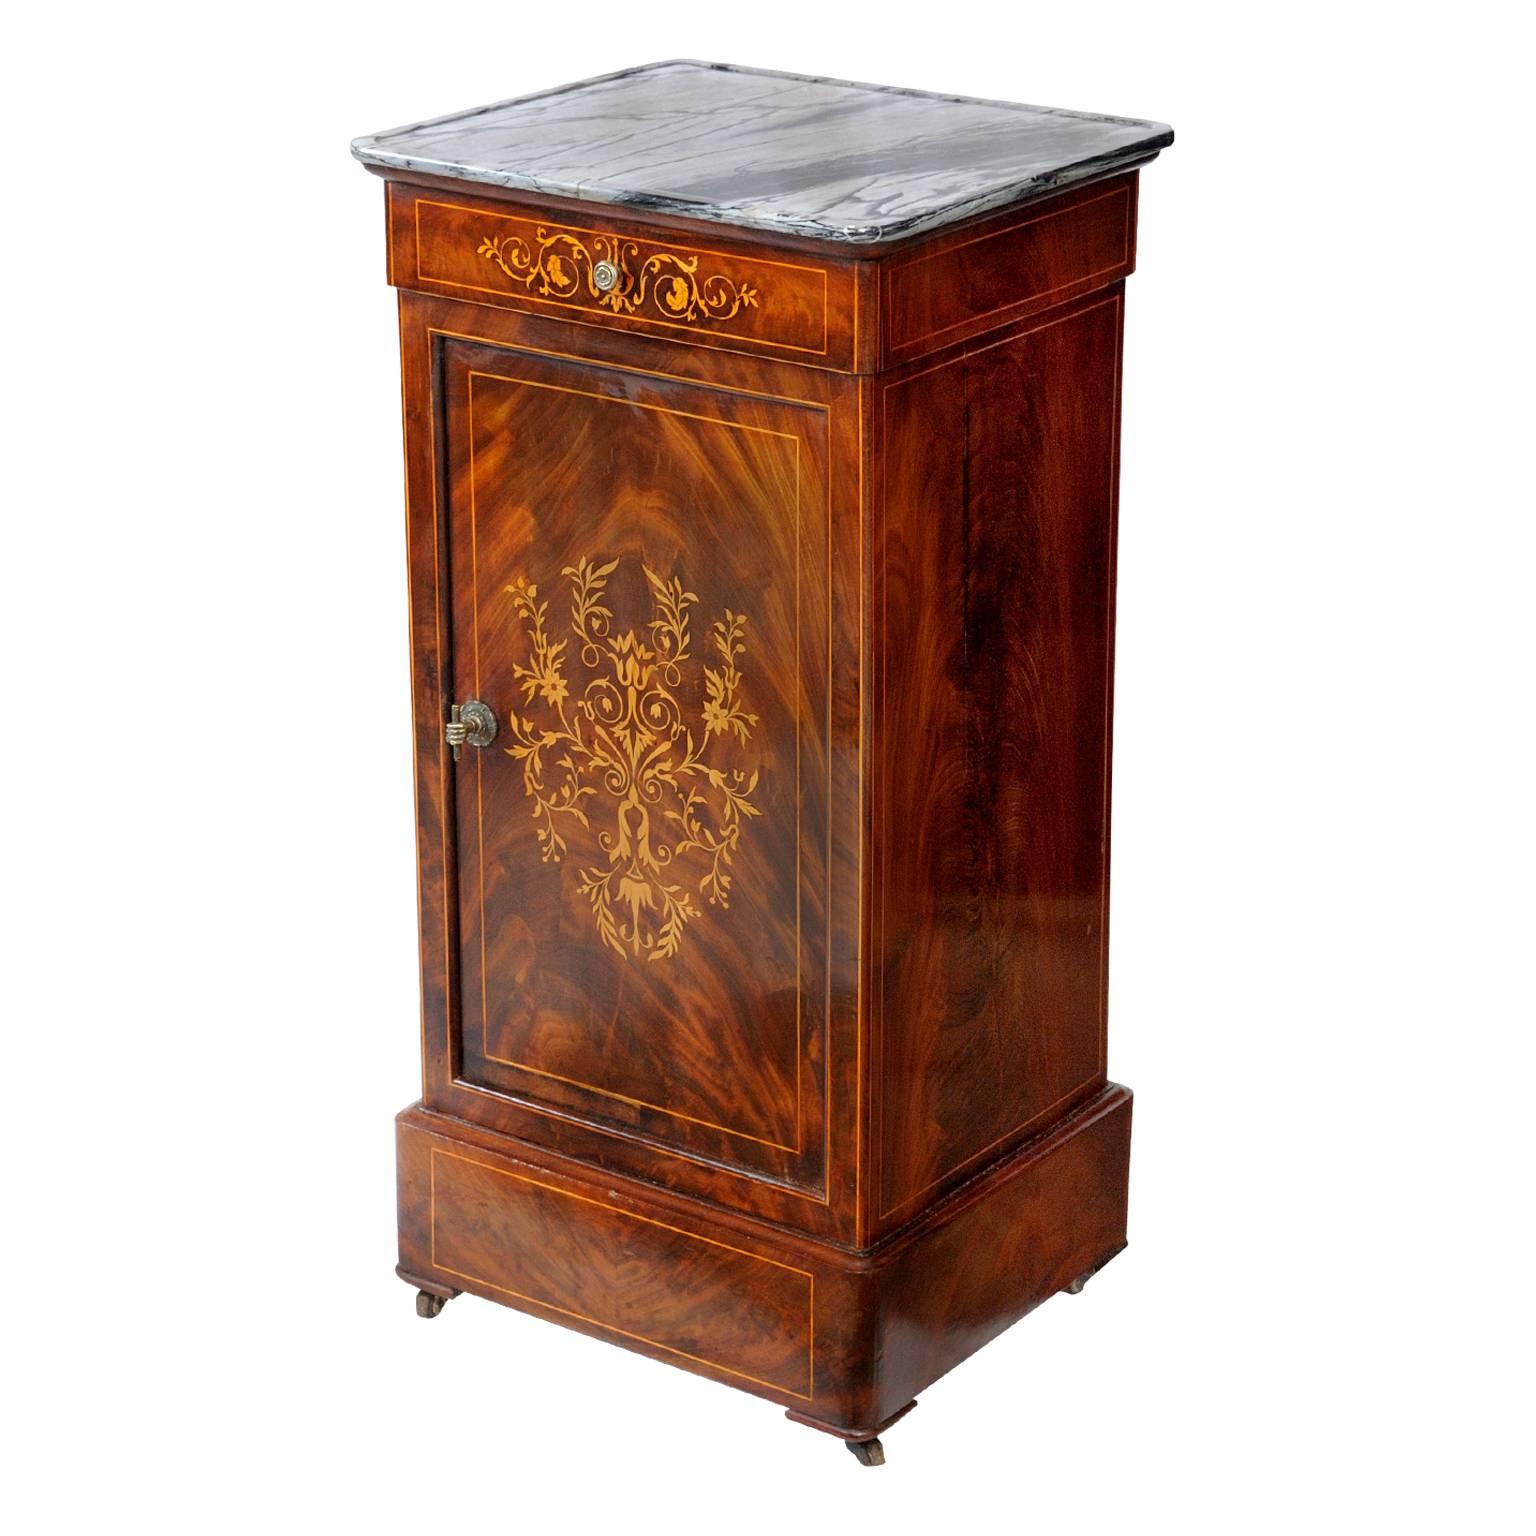 This is a quite superb French early 19th century mahogany night or bedside table with beautifully detailed inlays and a lovely grey marble top. The stand has a compartment with two shelves, one being made of marble and is complete with its original